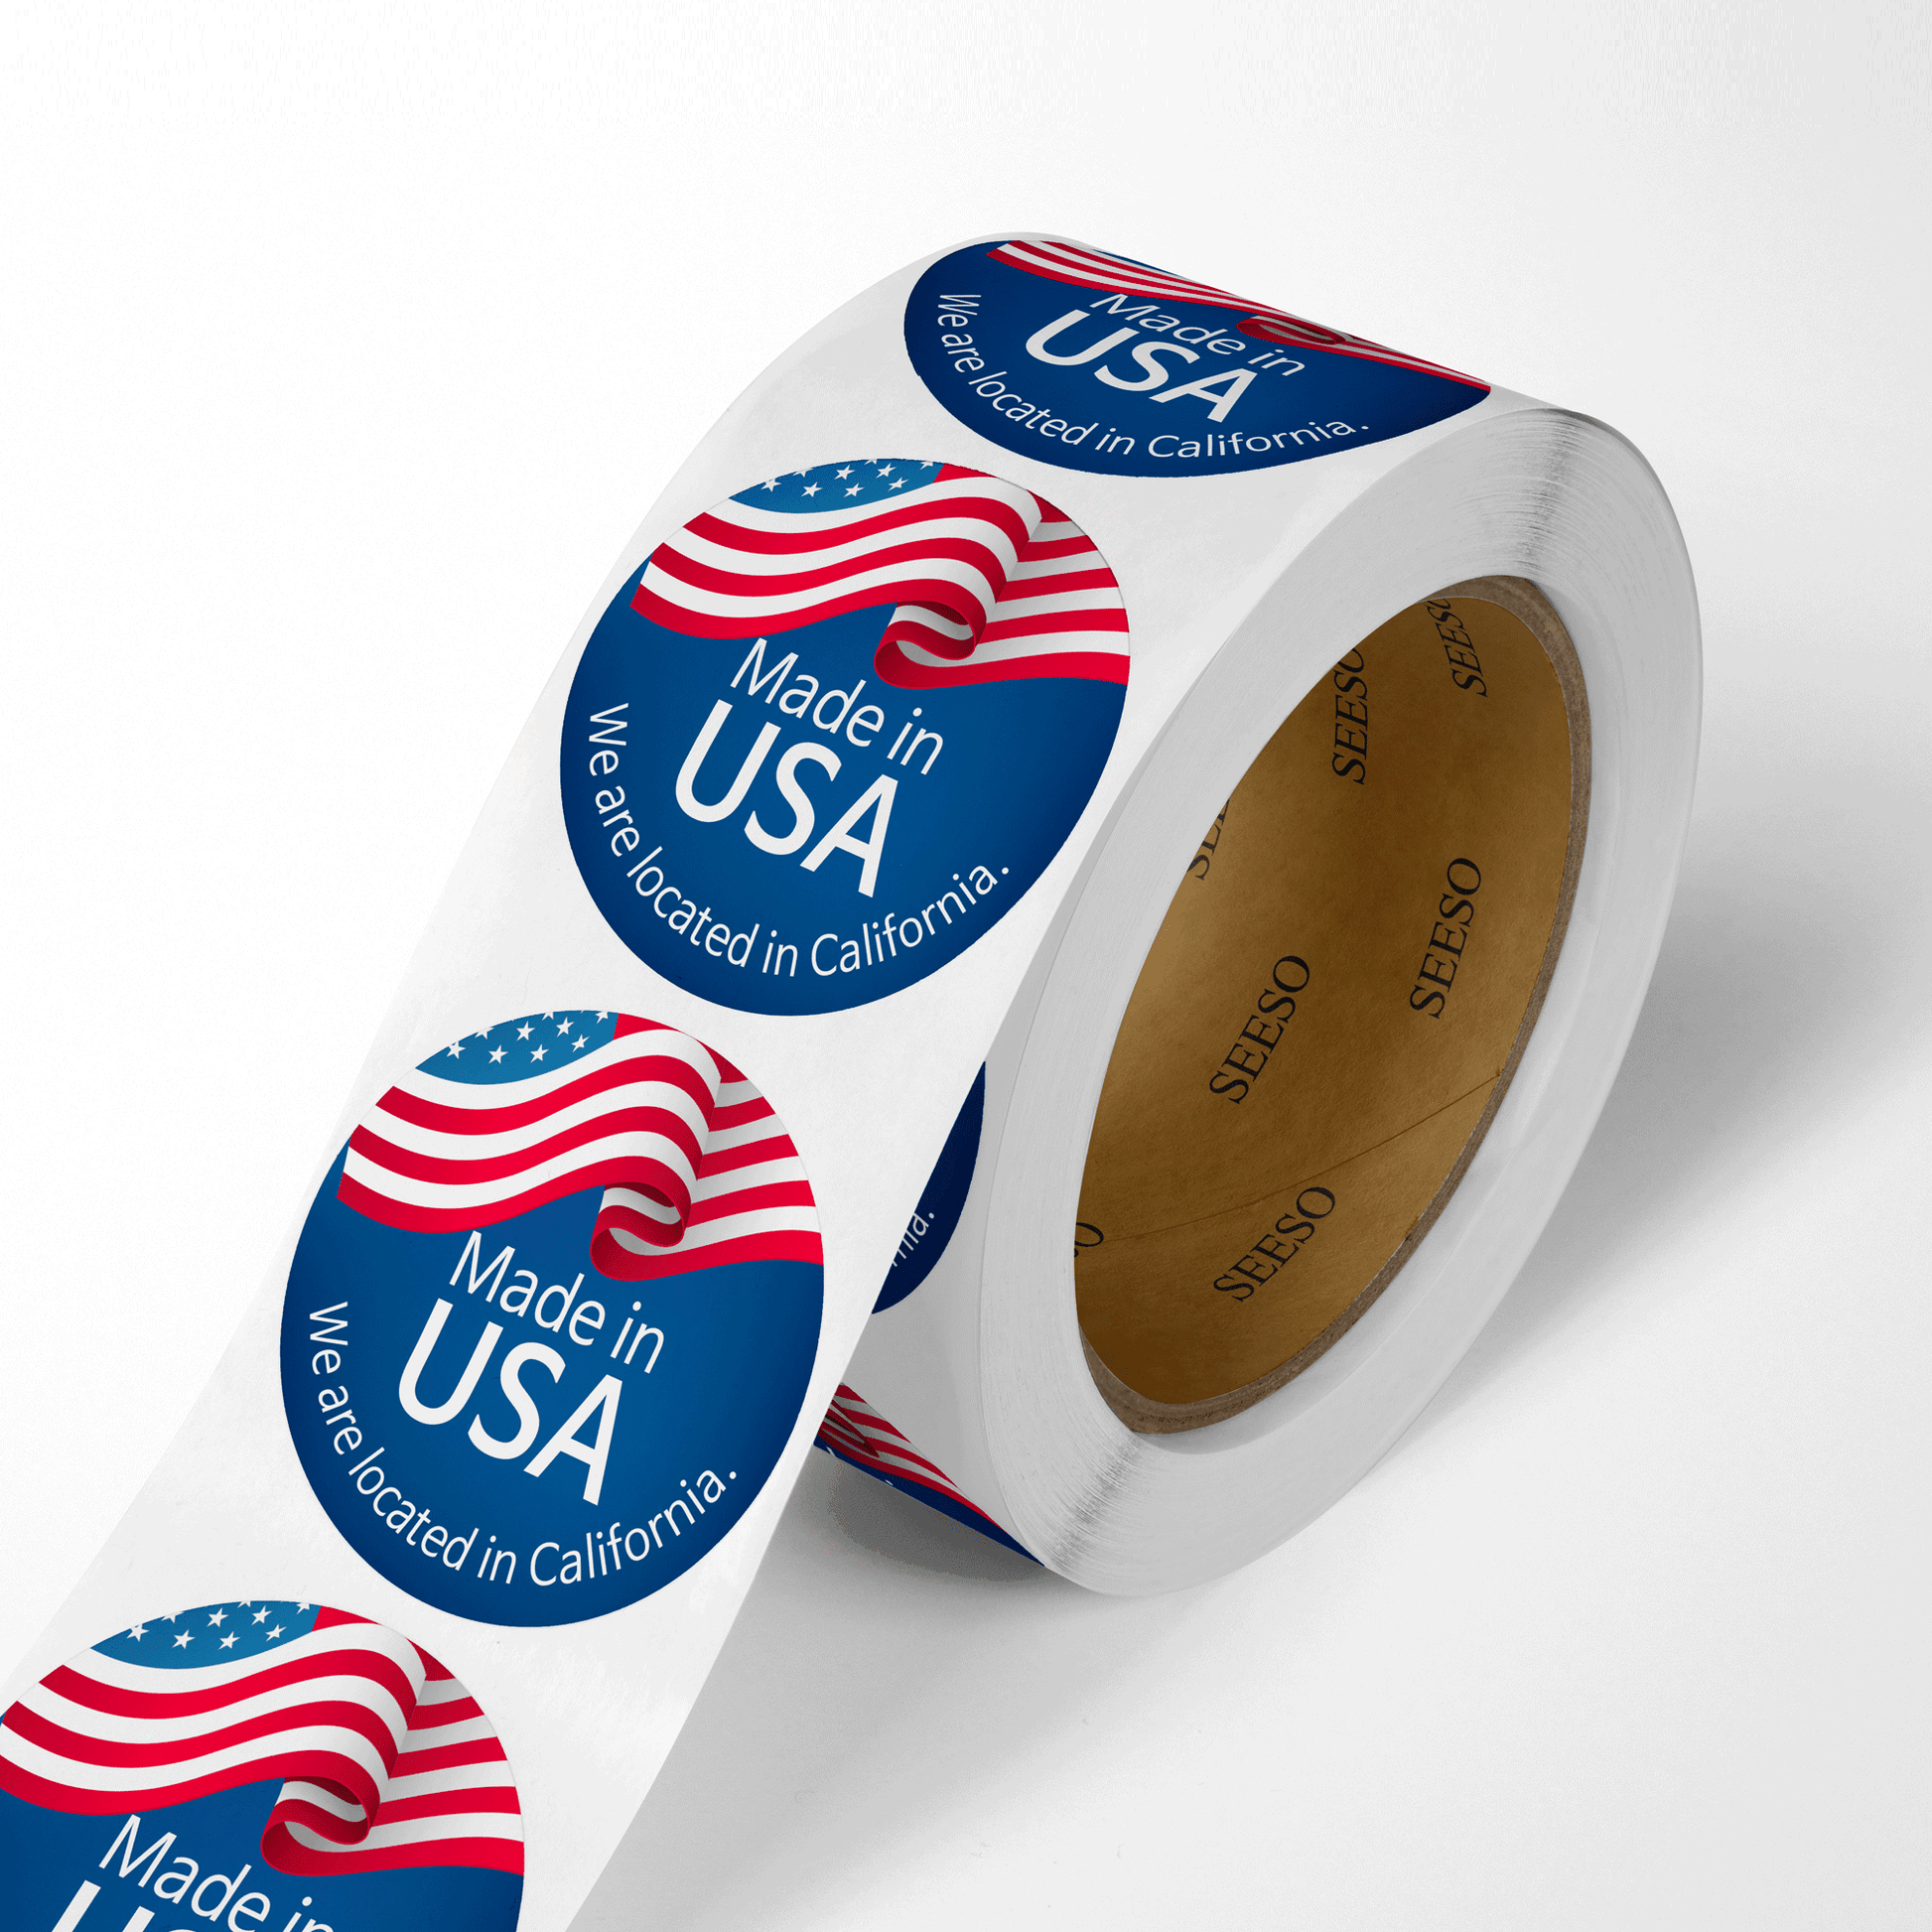 Free Labels - Custom Gloss Paper Roll Labels. 2-inch, Round, Square, Rounded Square - RedPrinting.com